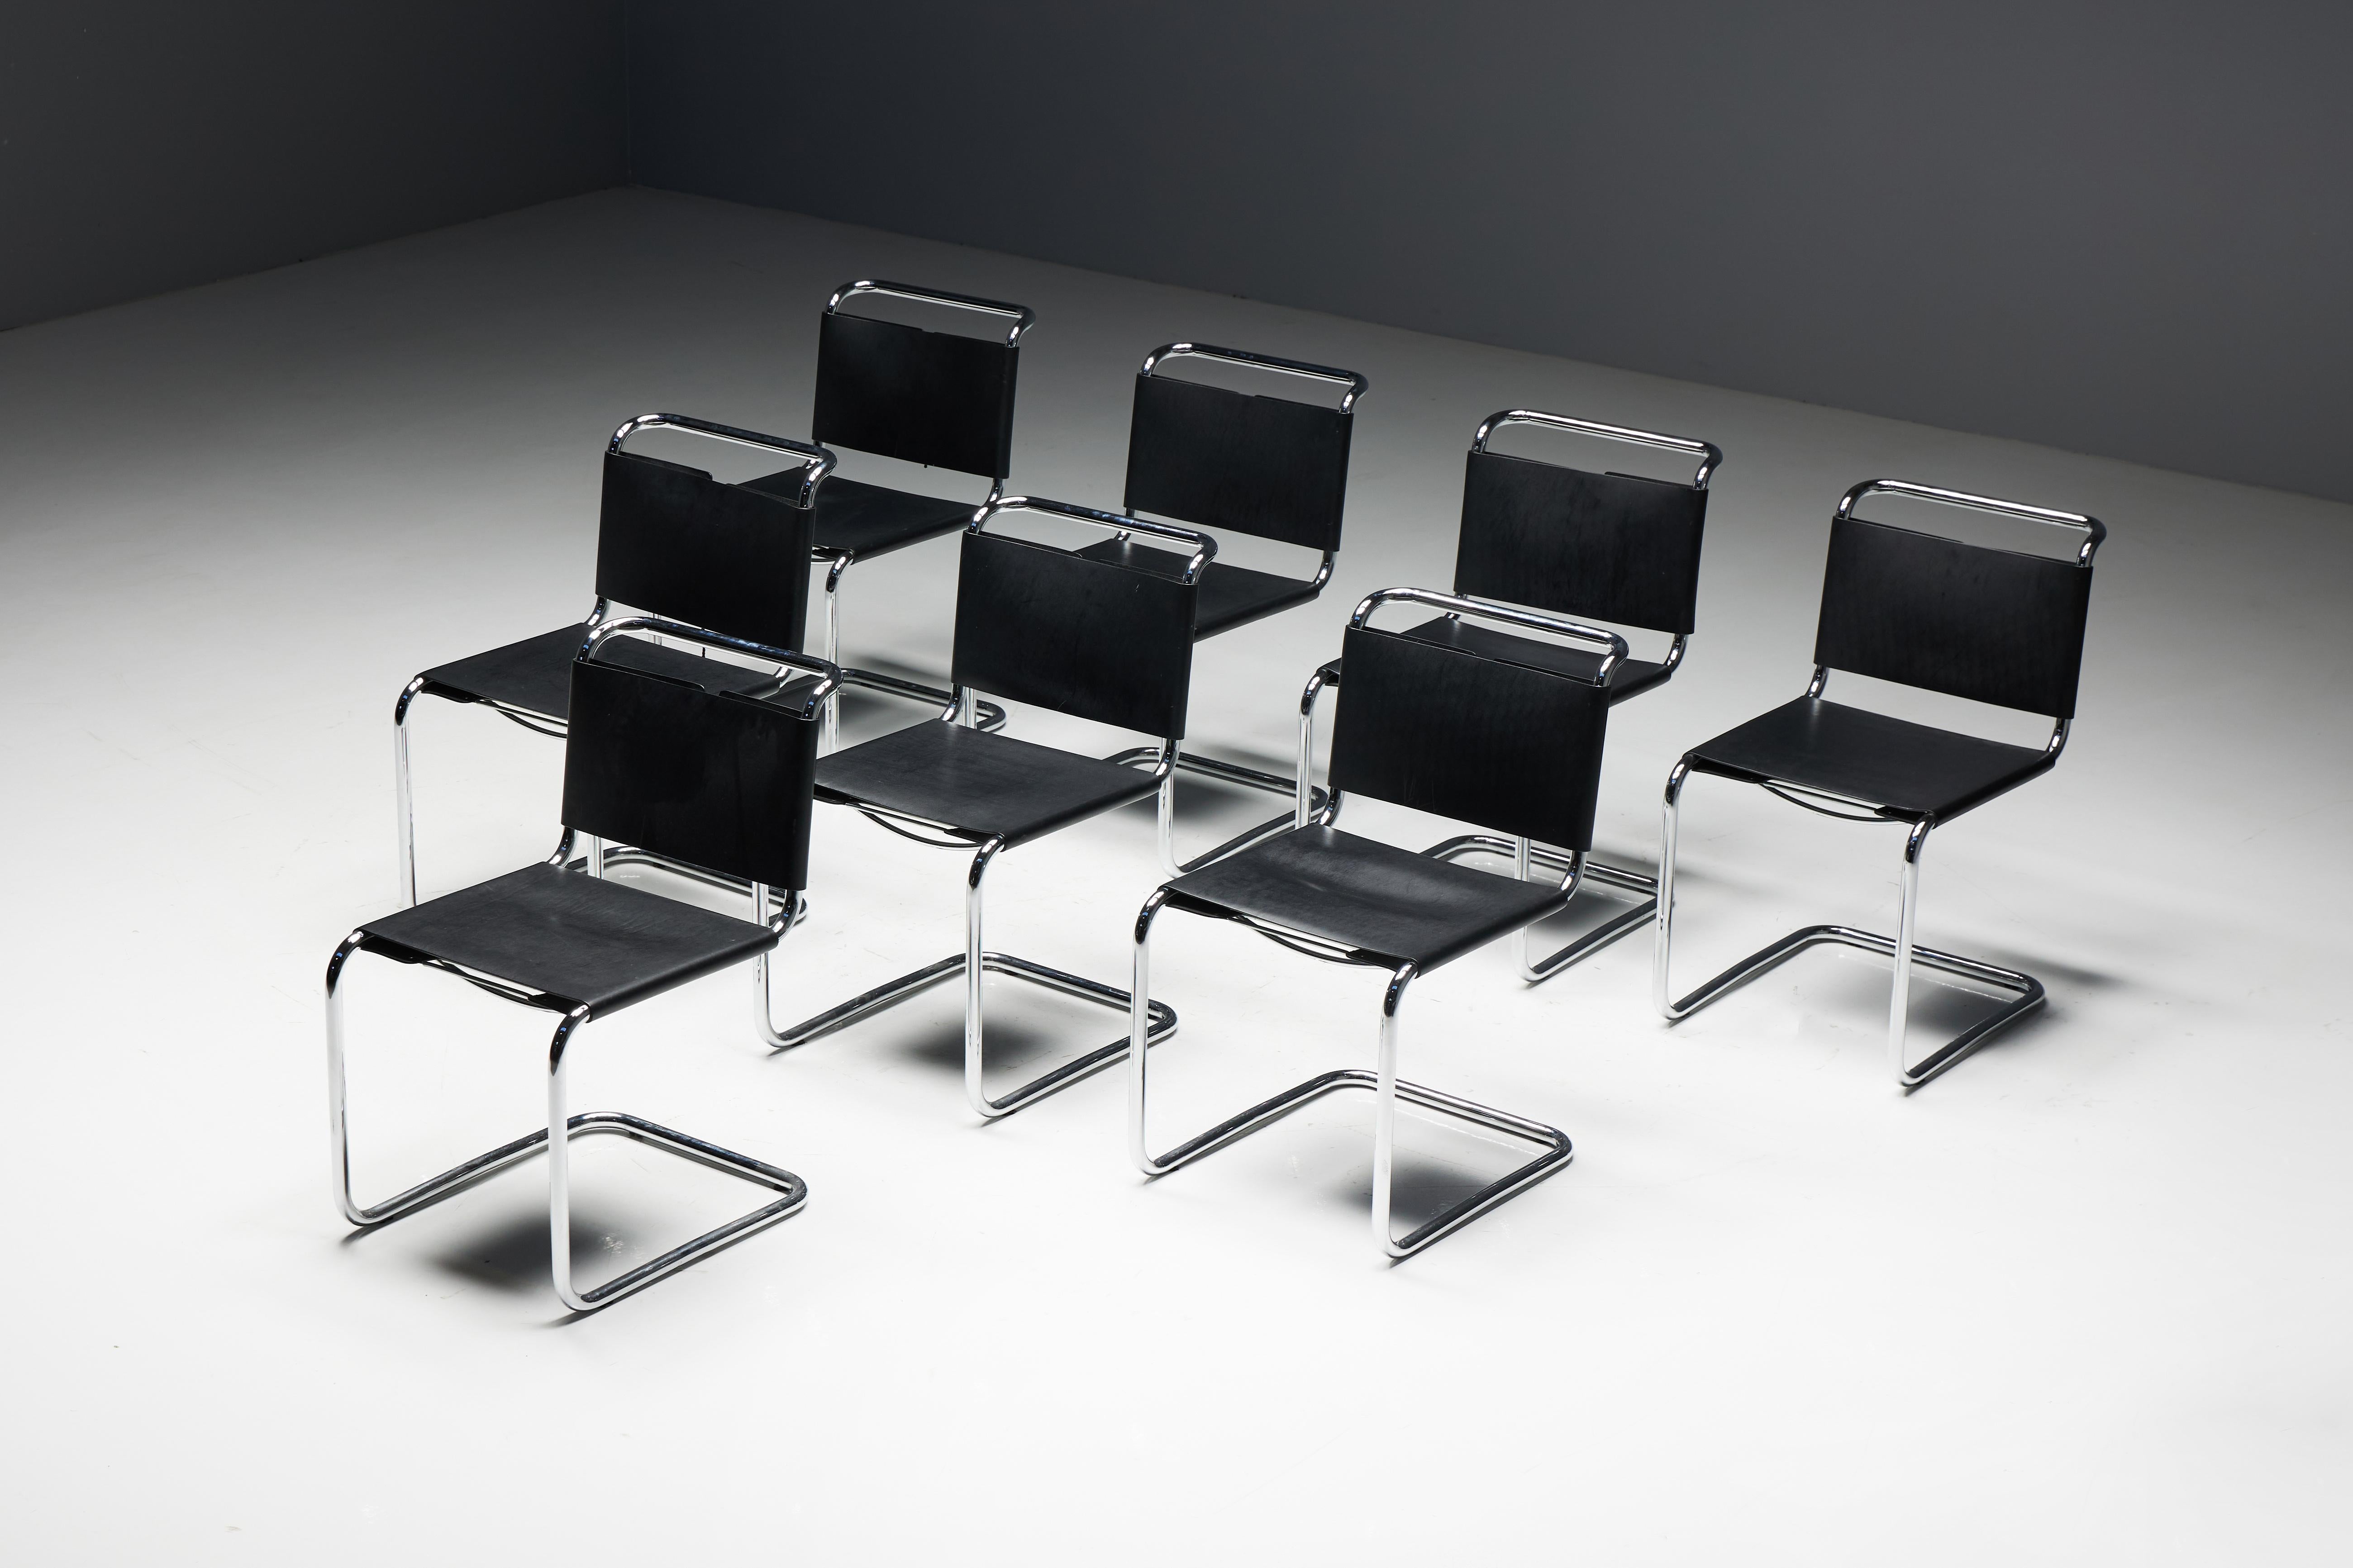 Spoleto Chair by Ufficio Tecnico for Knoll, a timeless piece of modern design. These chairs boast black leather seats integrated with polished chrome frames. The laced backrests not only provide comfort and support but also contribute to the chair's